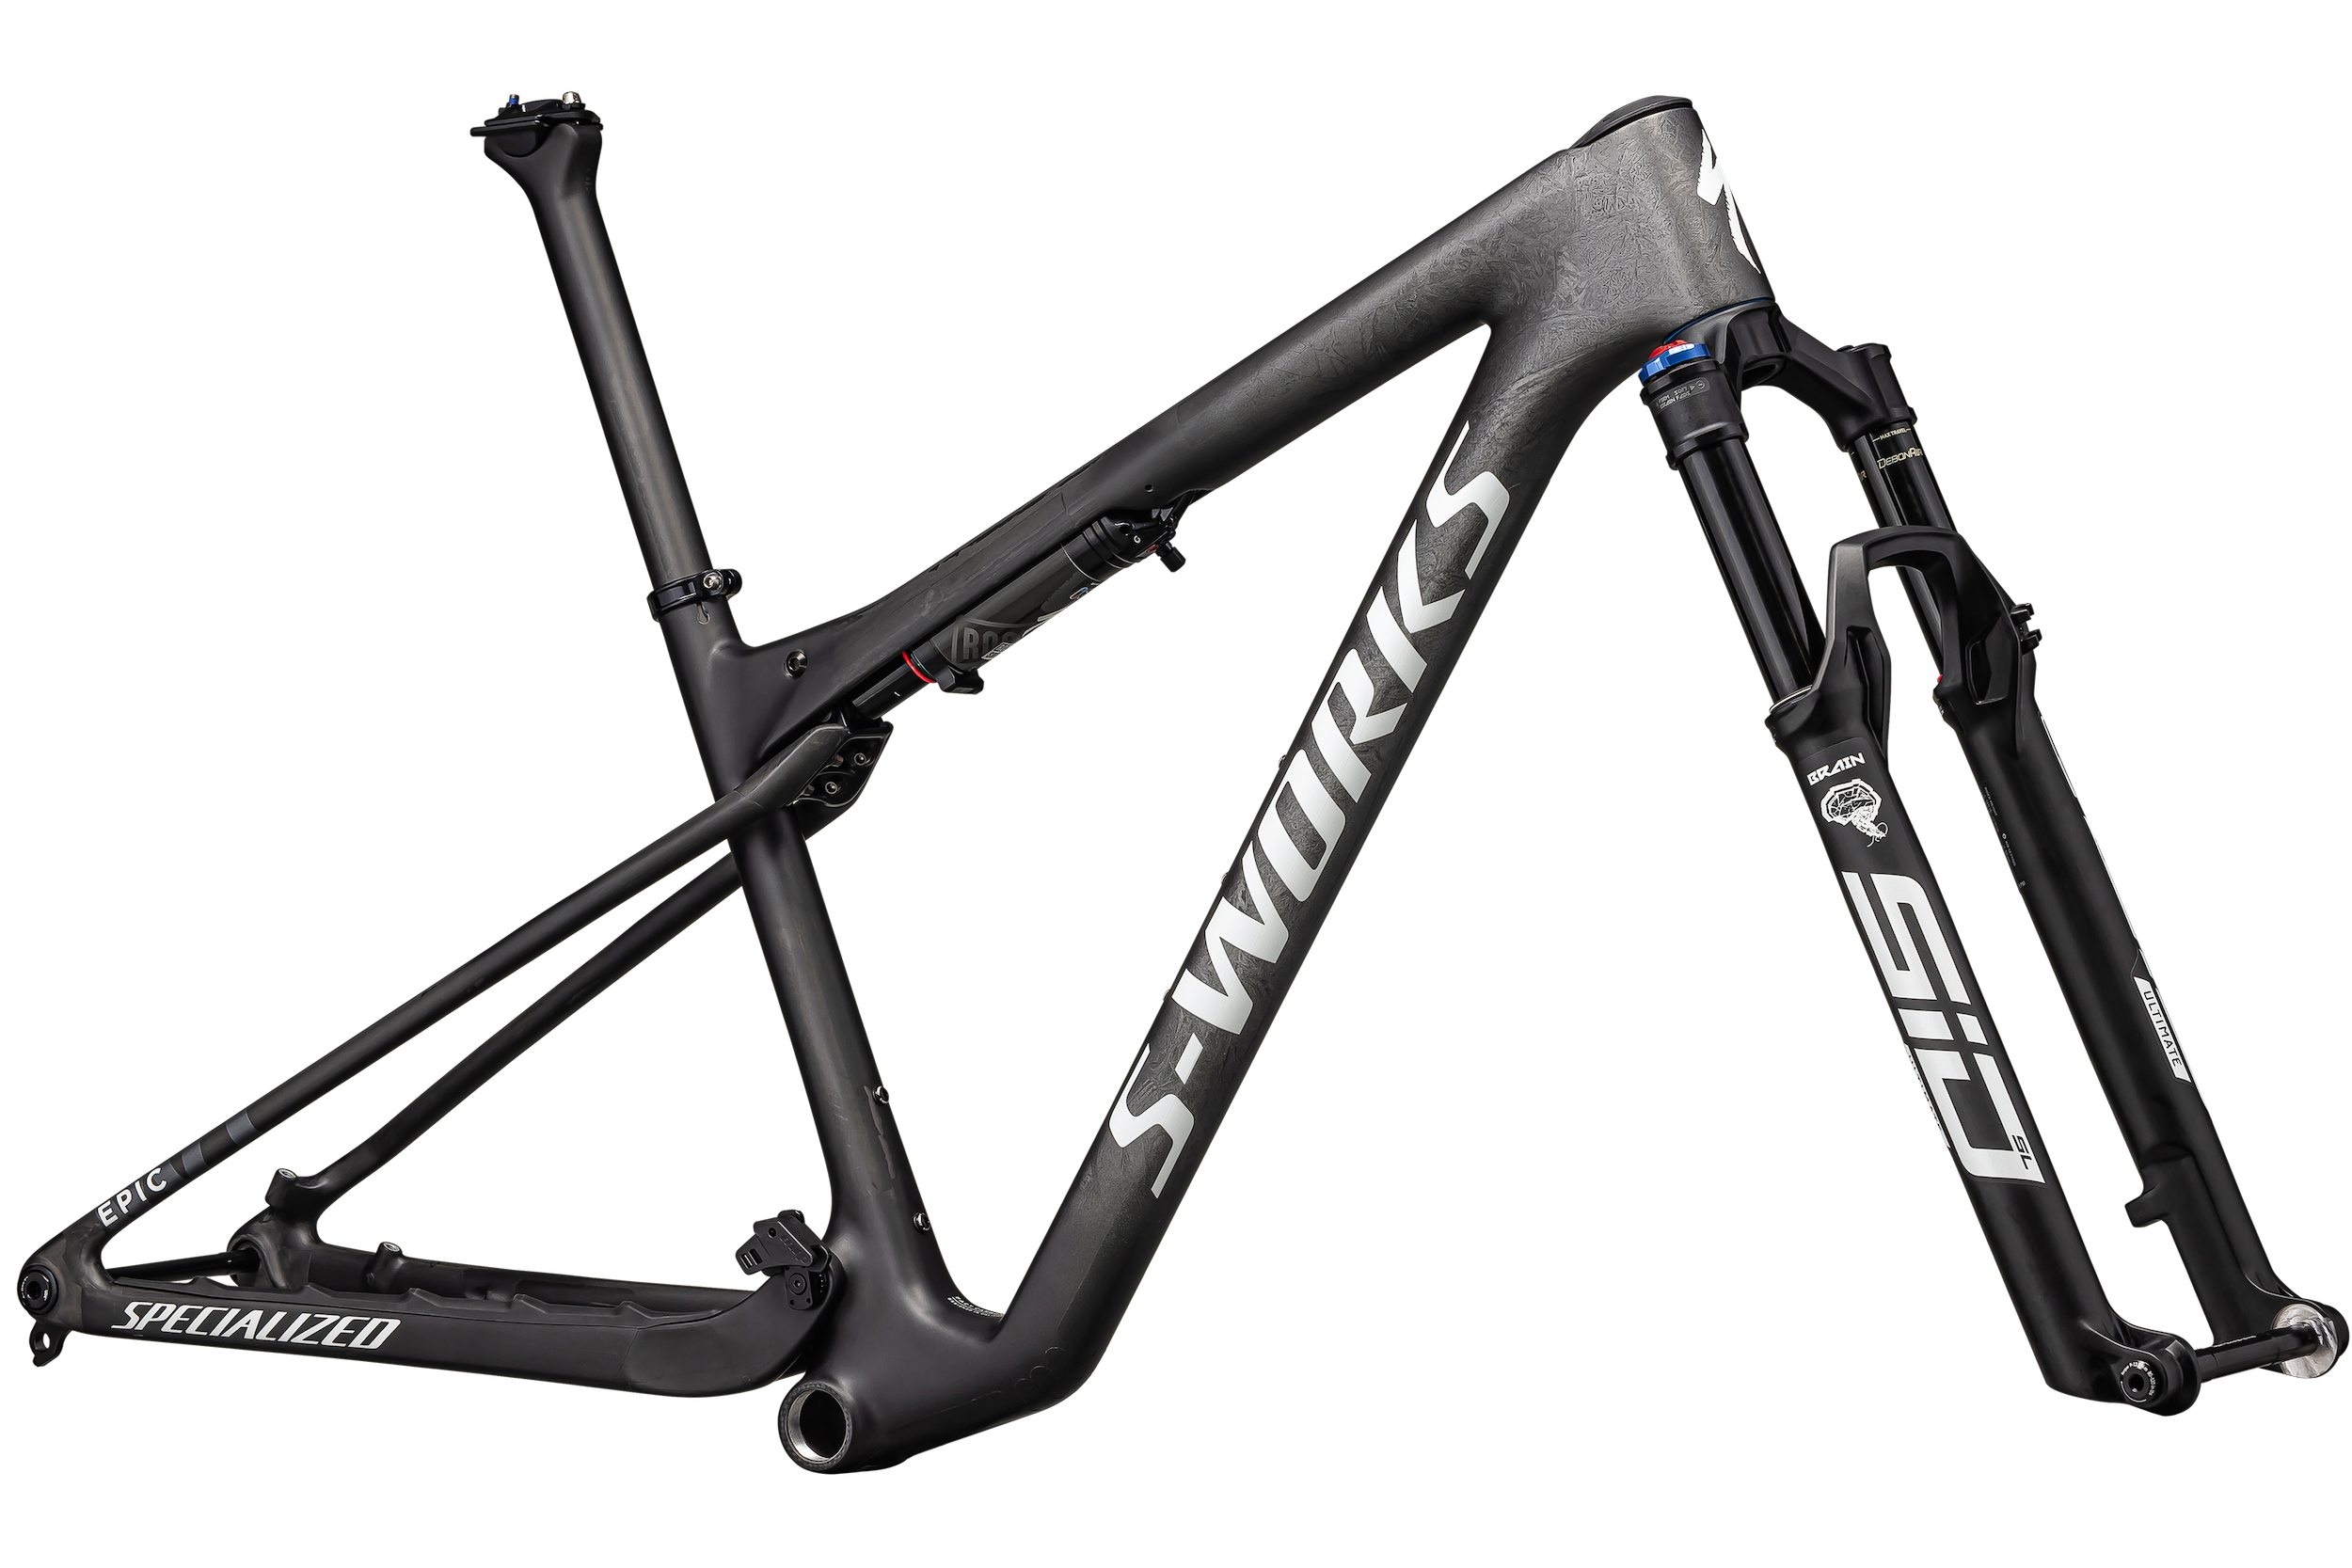 All-New S-Works Epic World Cup Frameset